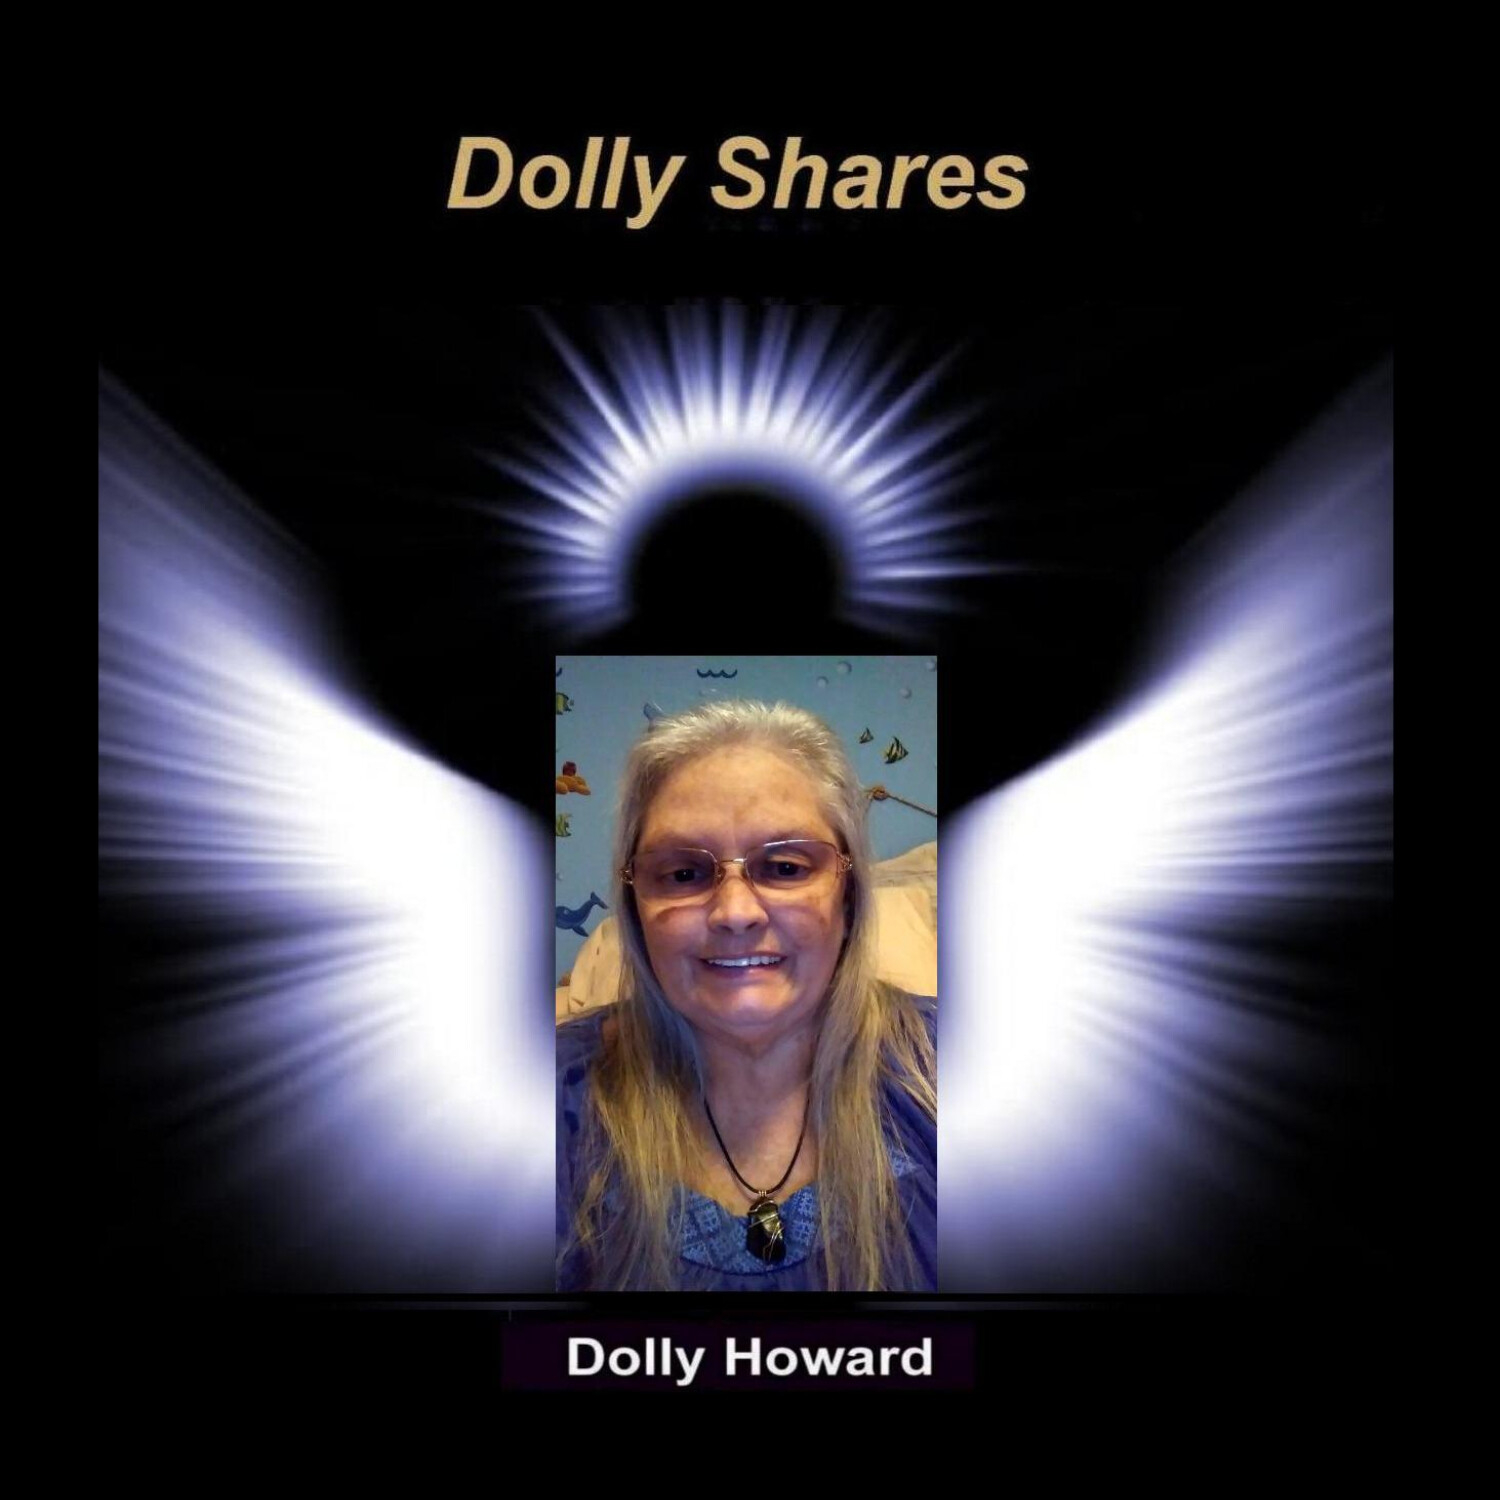 “Dolly Shares” 4/3/19 - For men mostly, love Dolly